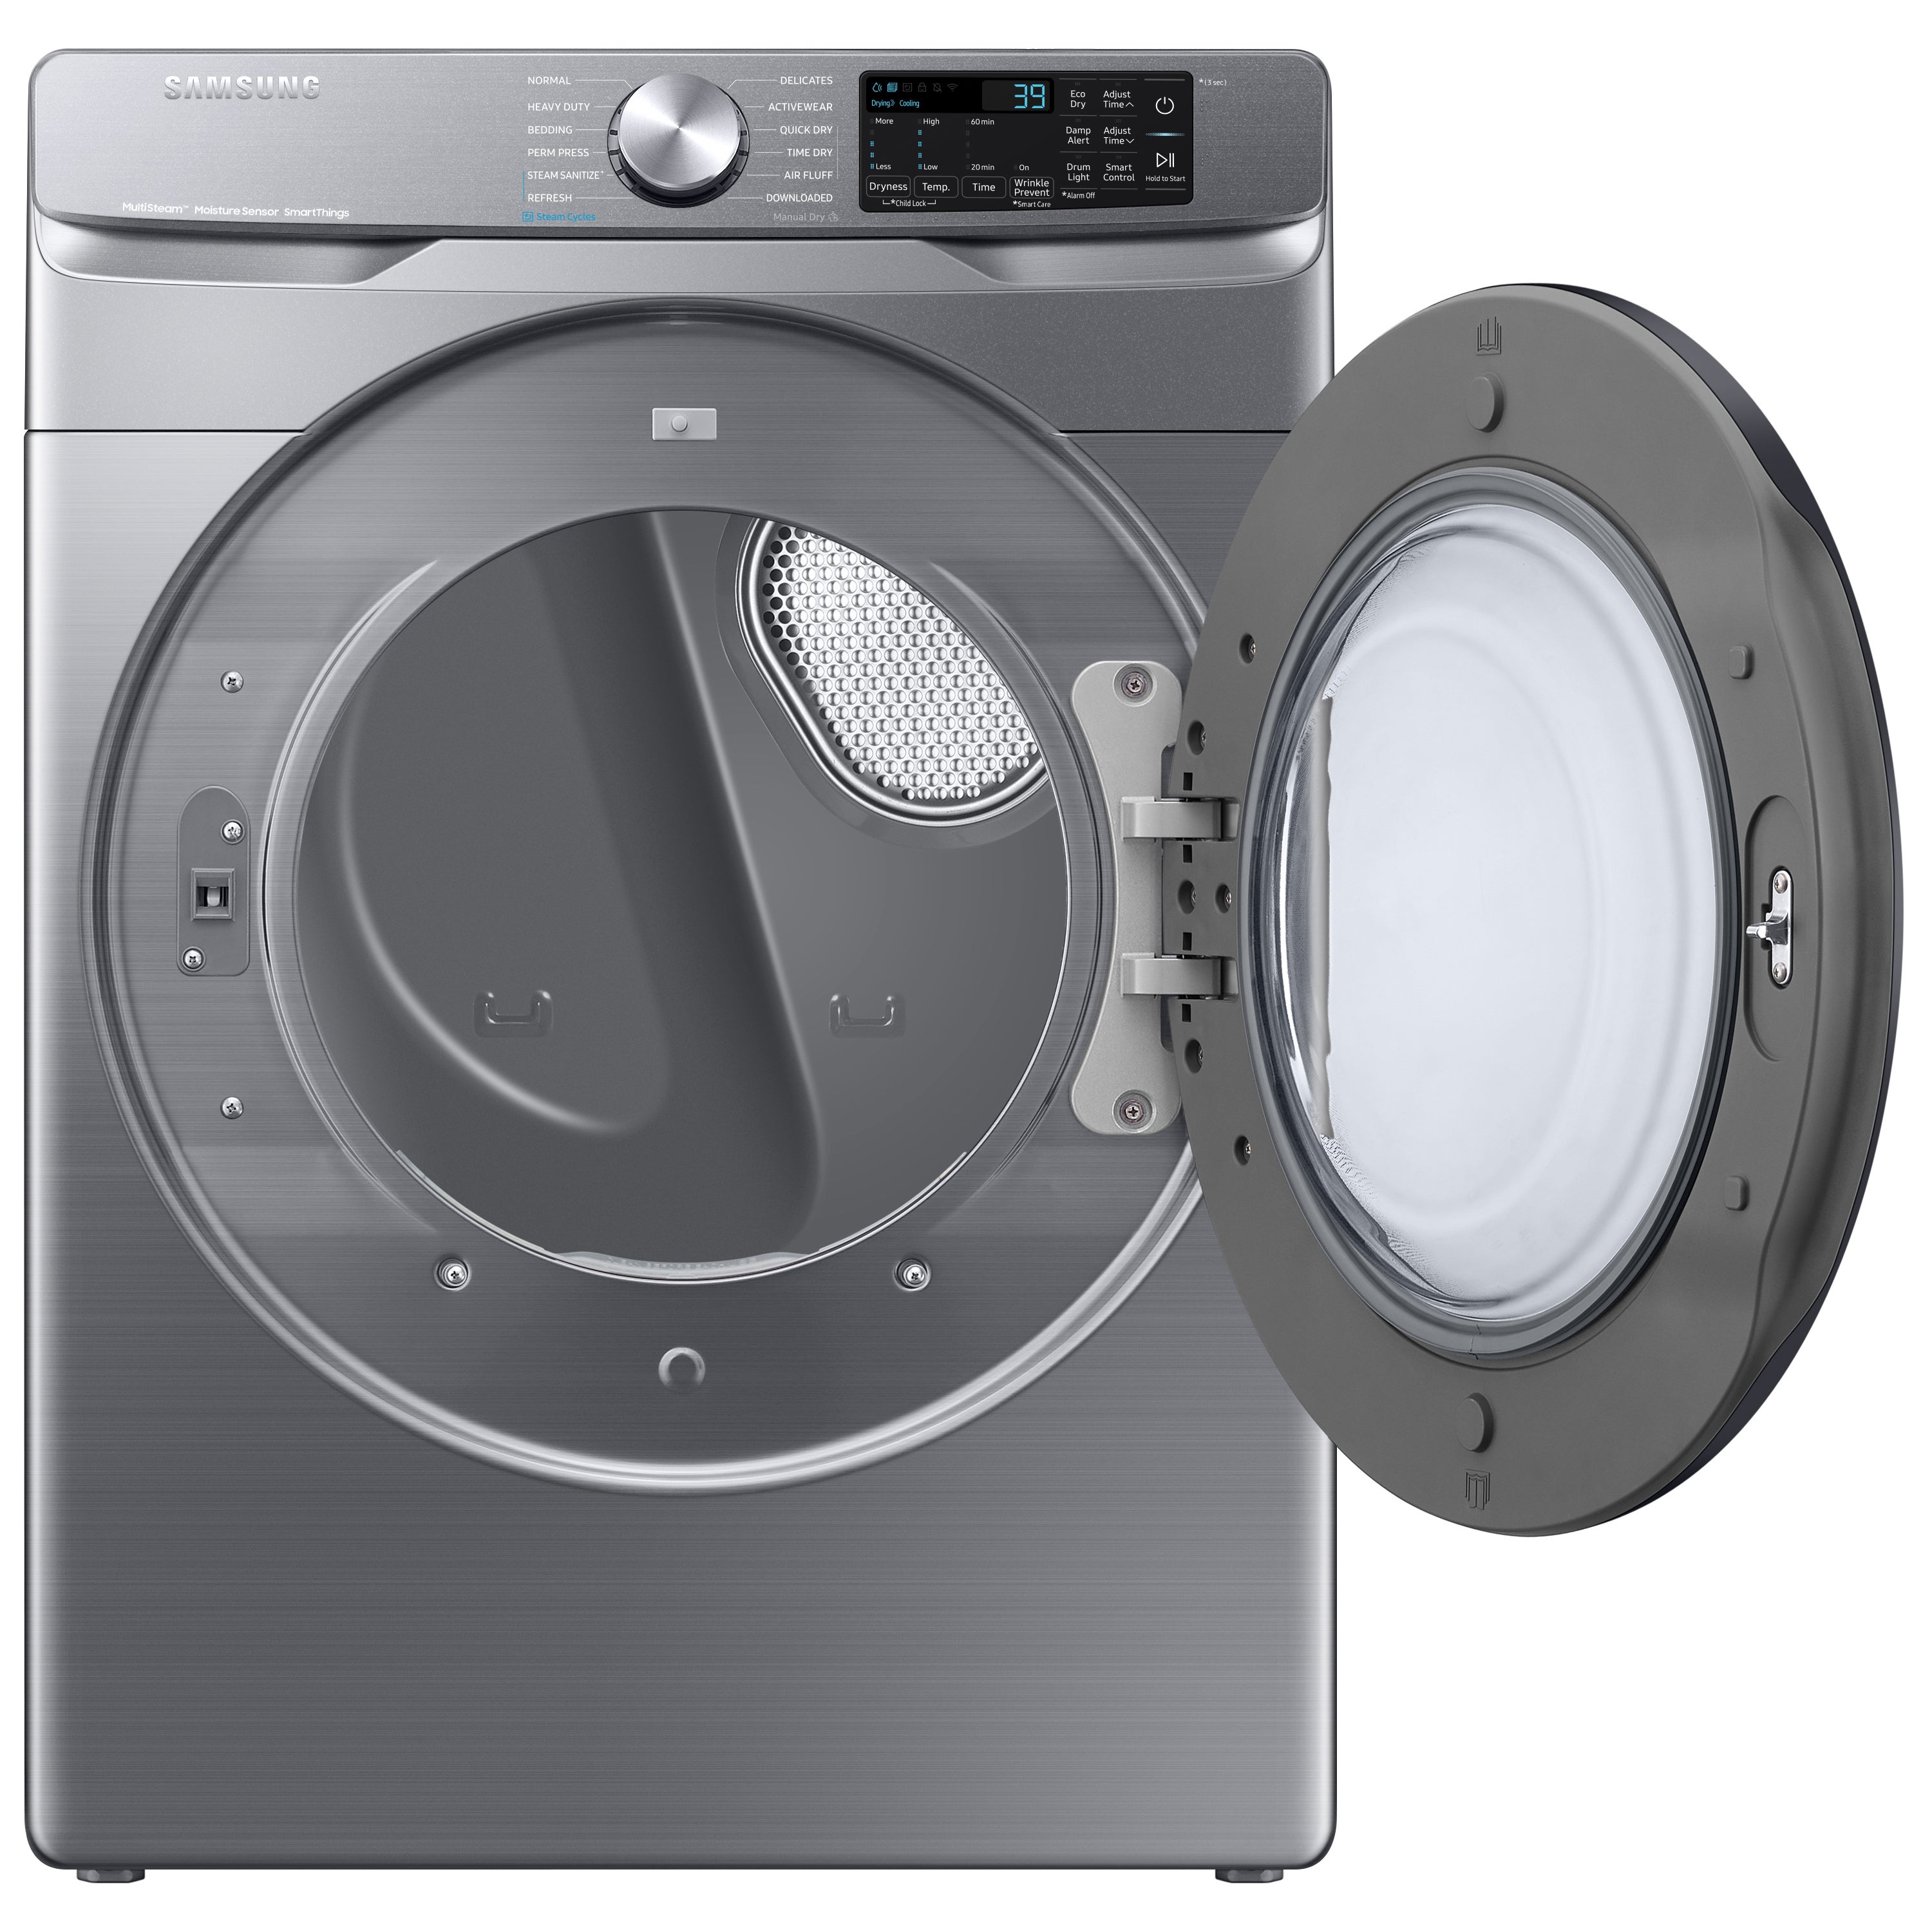 Morus 0.78 Cu.Ft. Vented Front Load Electric Dryer in Gray with Smart Sensor System